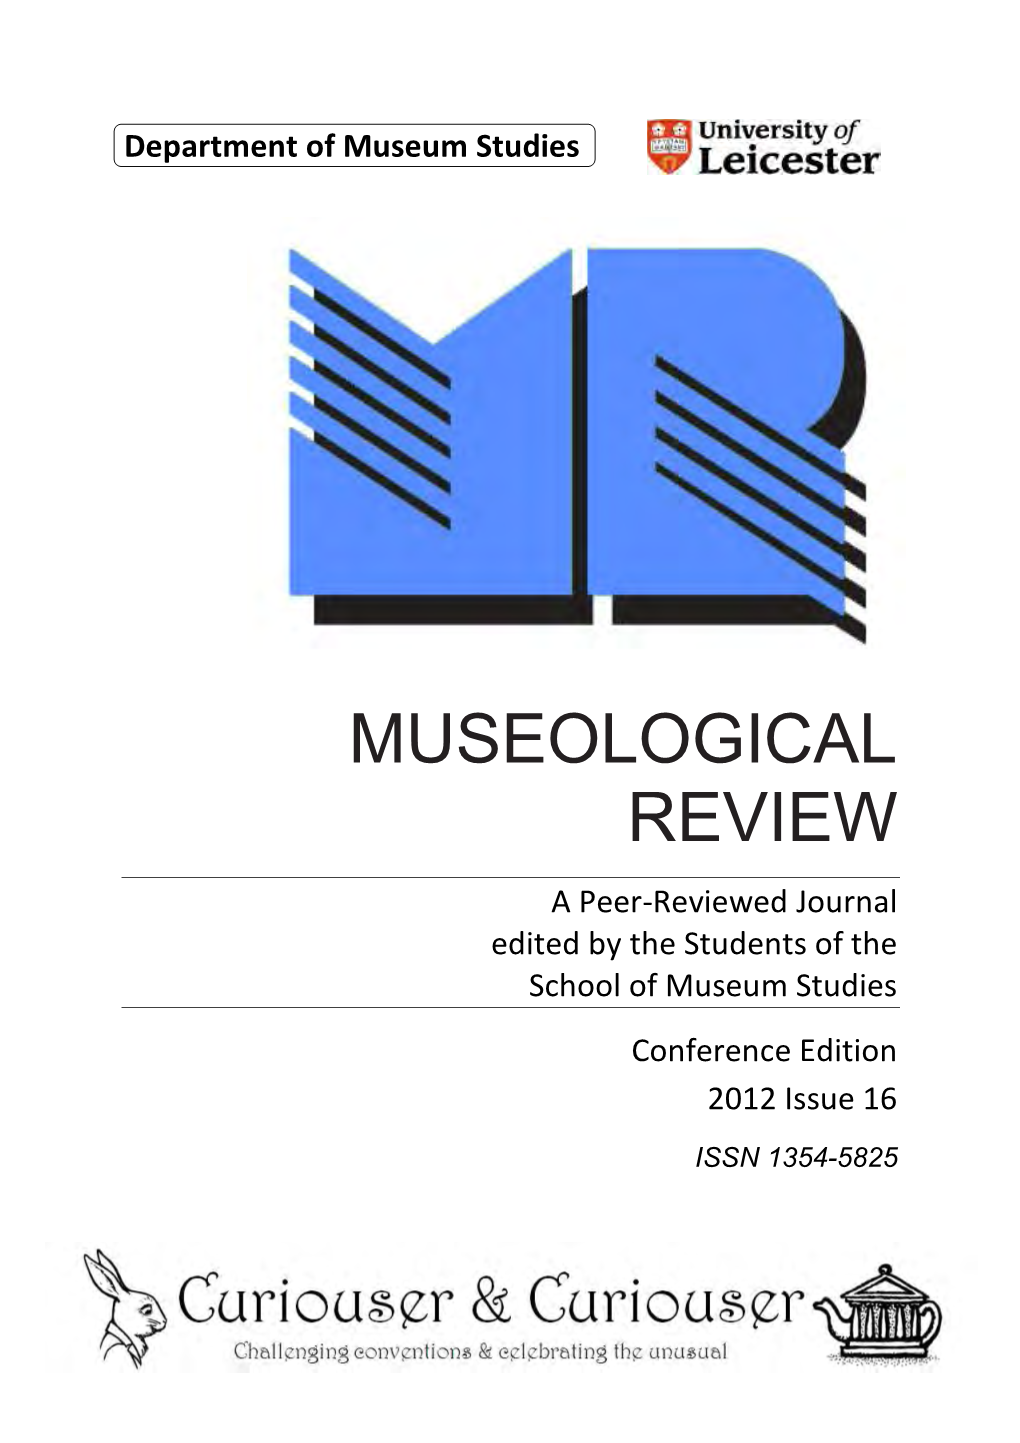 MUSEOLOGICAL REVIEW a Peer-Reviewed Journal Edited by the Students of the School of Museum Studies Conference Edition 2012 Issue 16 ISSN 1354-5825